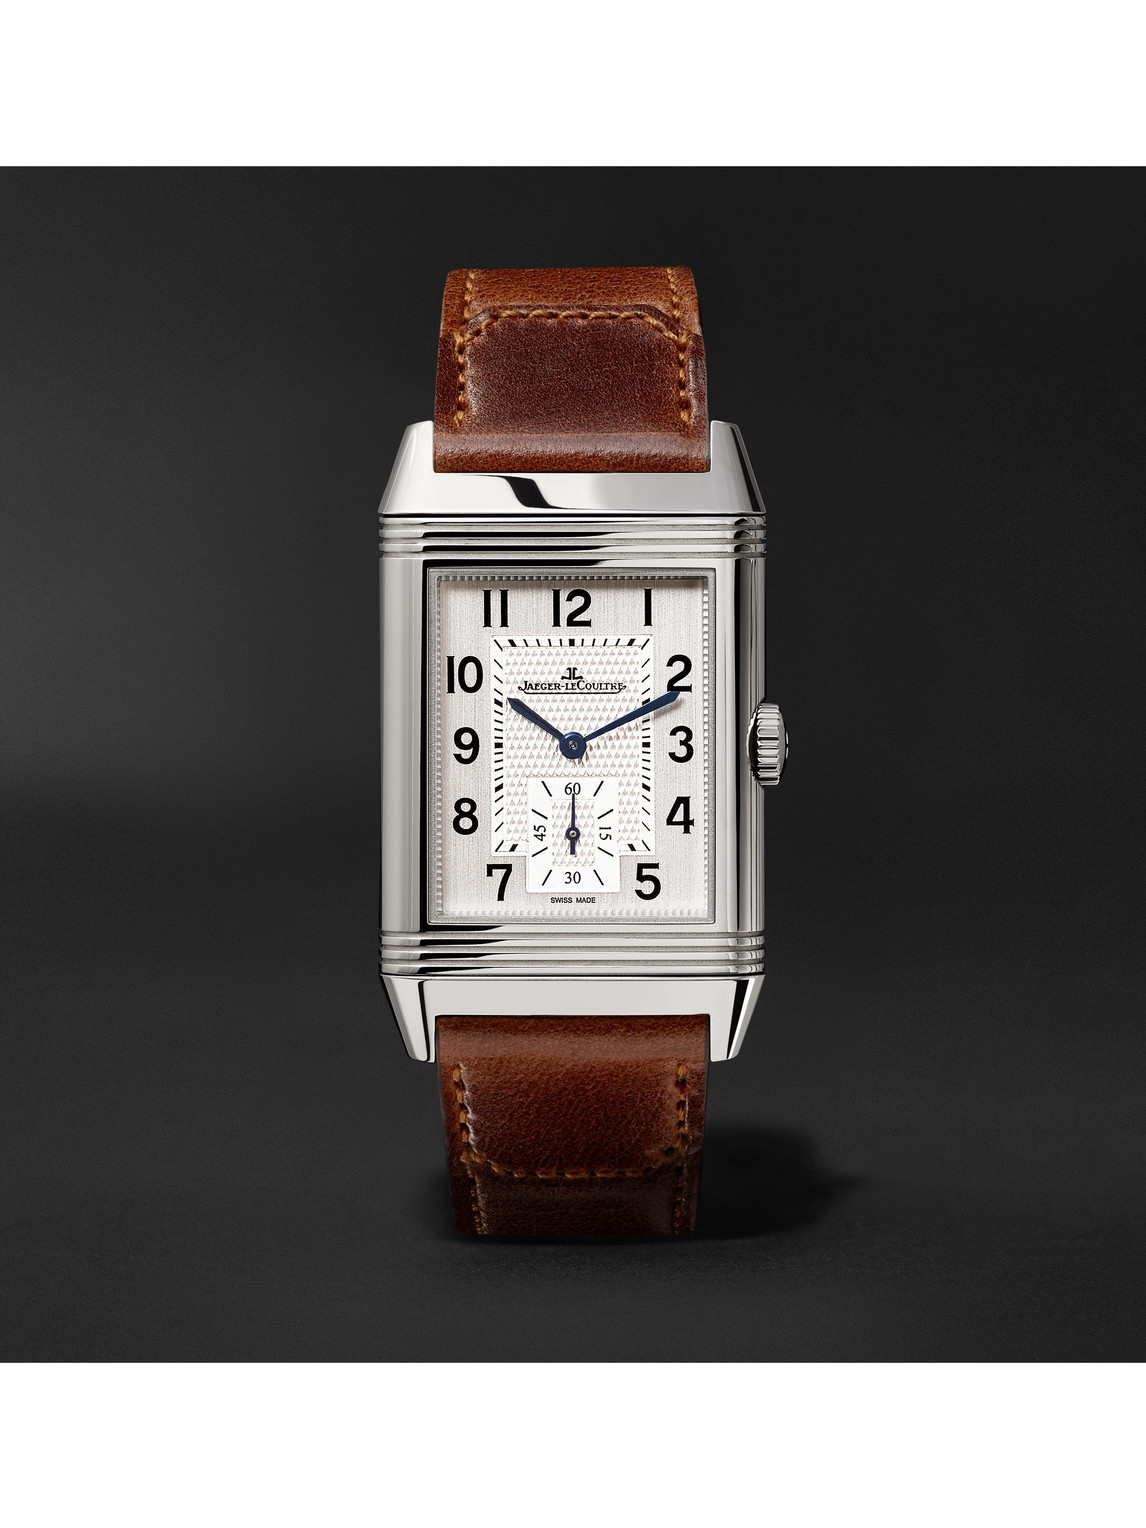 Reverso Classic Large Duoface Hand-Wound 47mm x 28.3mm Stainless Steel and Leather Watch, Ref. No. Q3848422